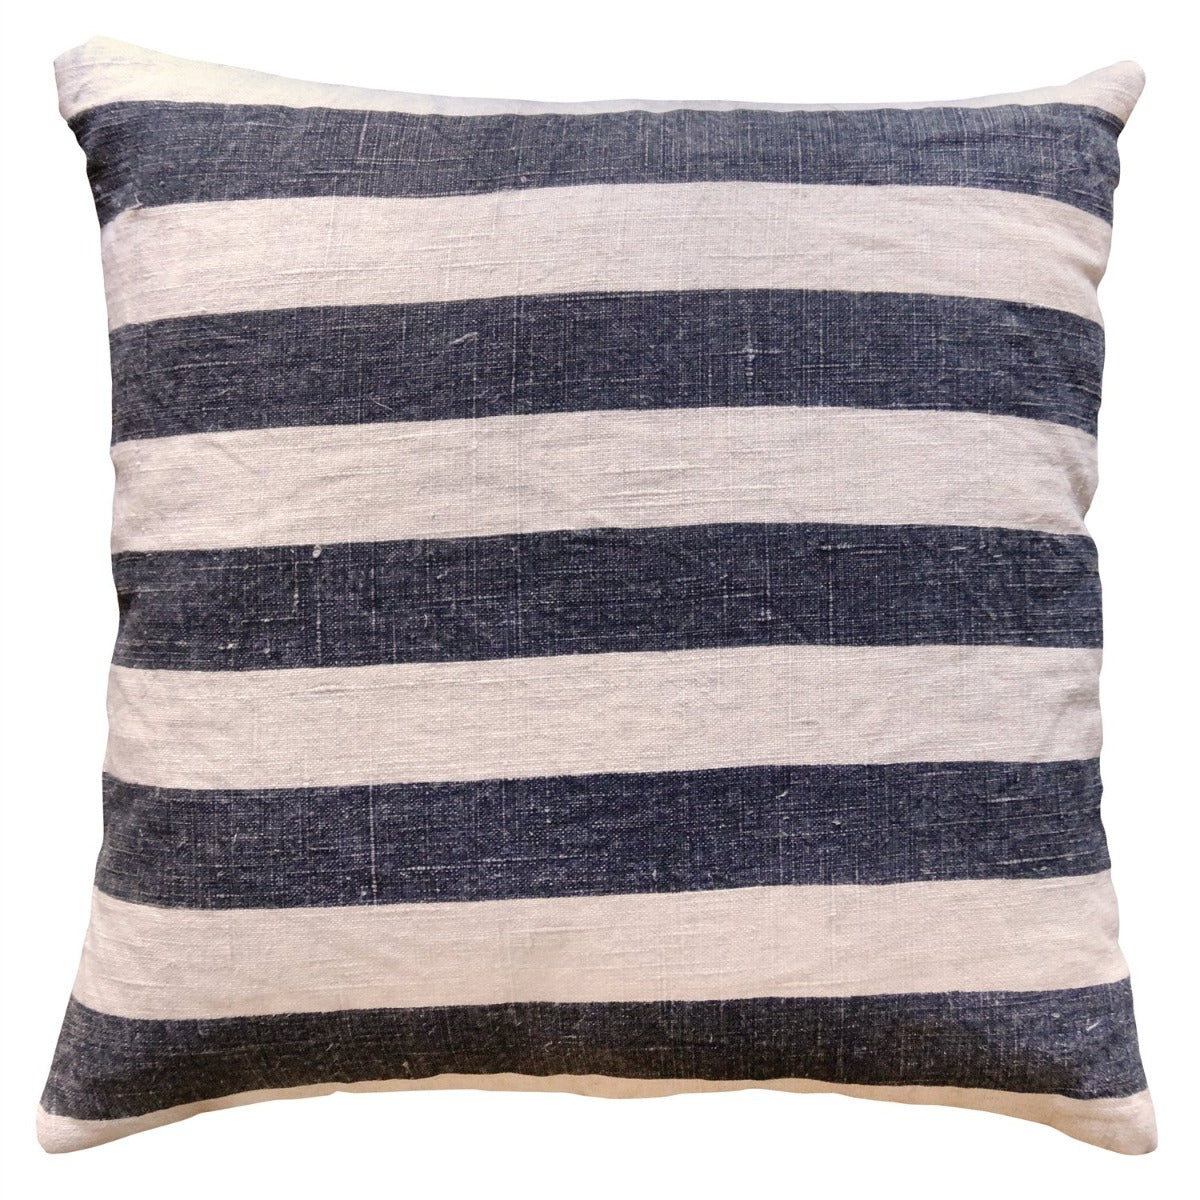 Black Stripe Linen Throw Pillow by Sugarboo